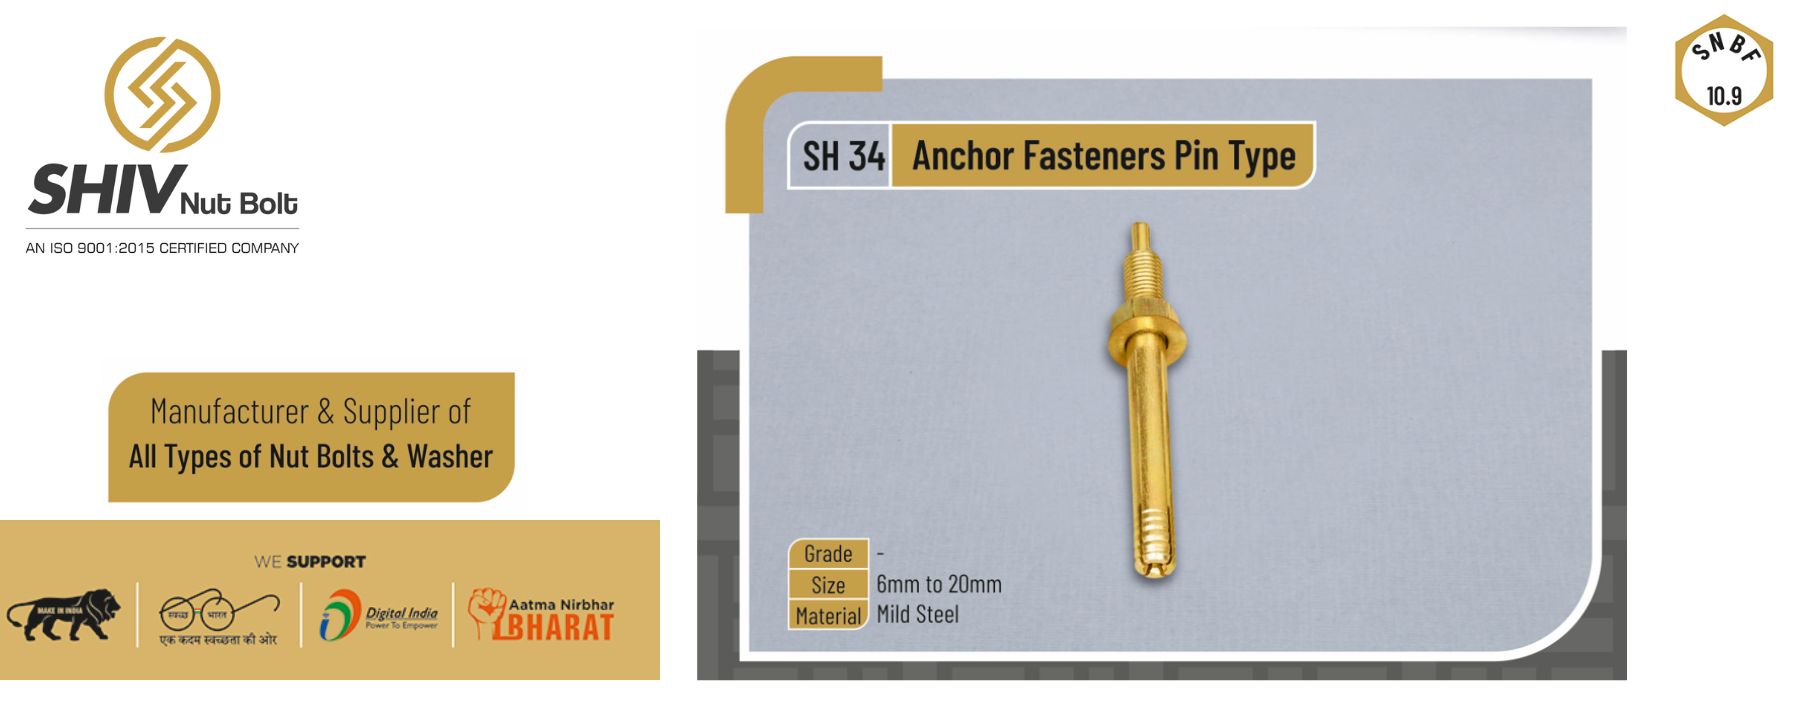 Anchor Fasteners Pin Type